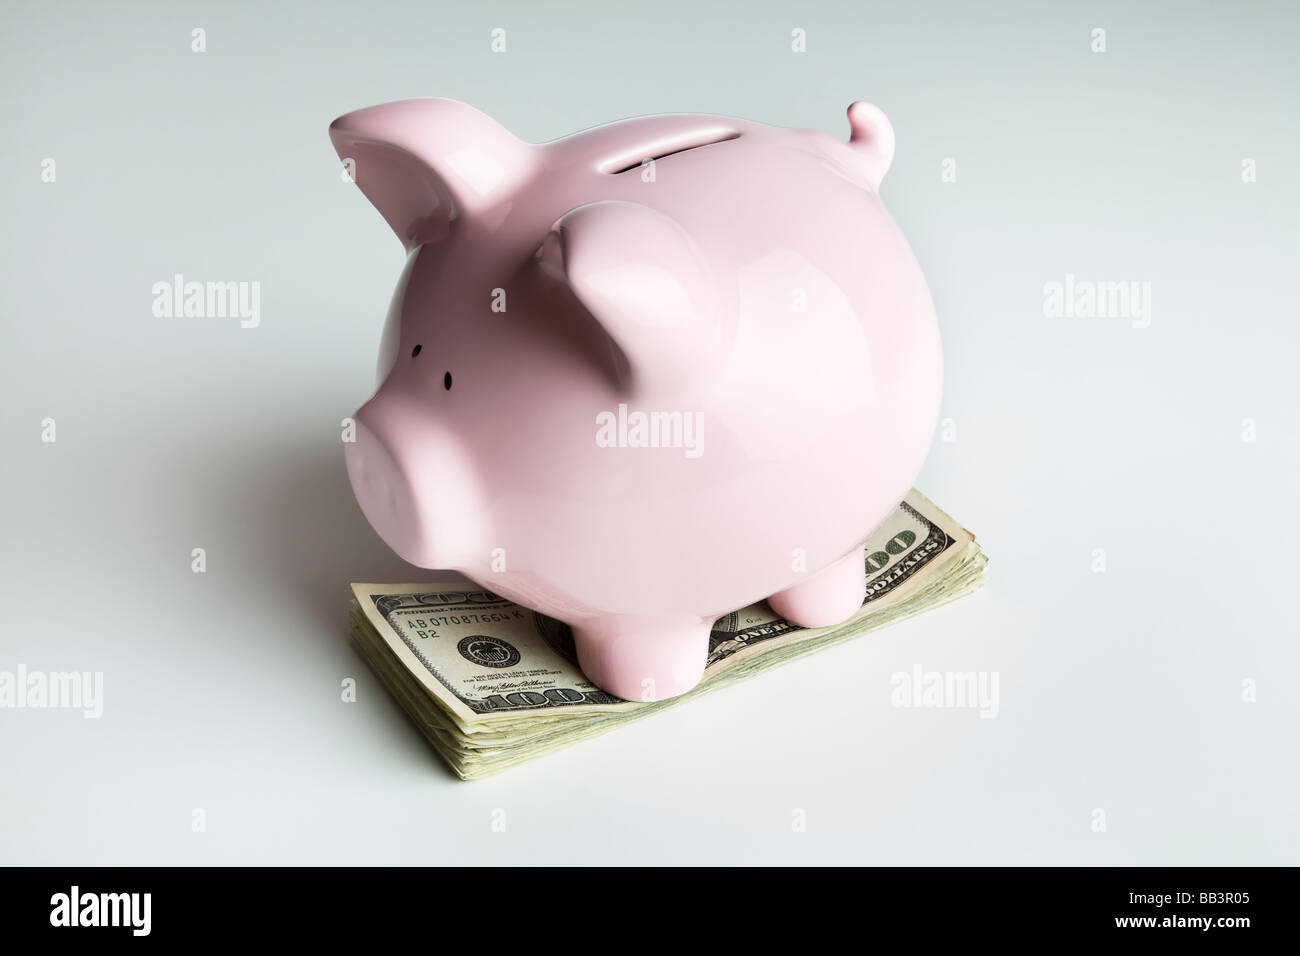 Piggy bank on a stack of 100 dollar bills Stock Photo